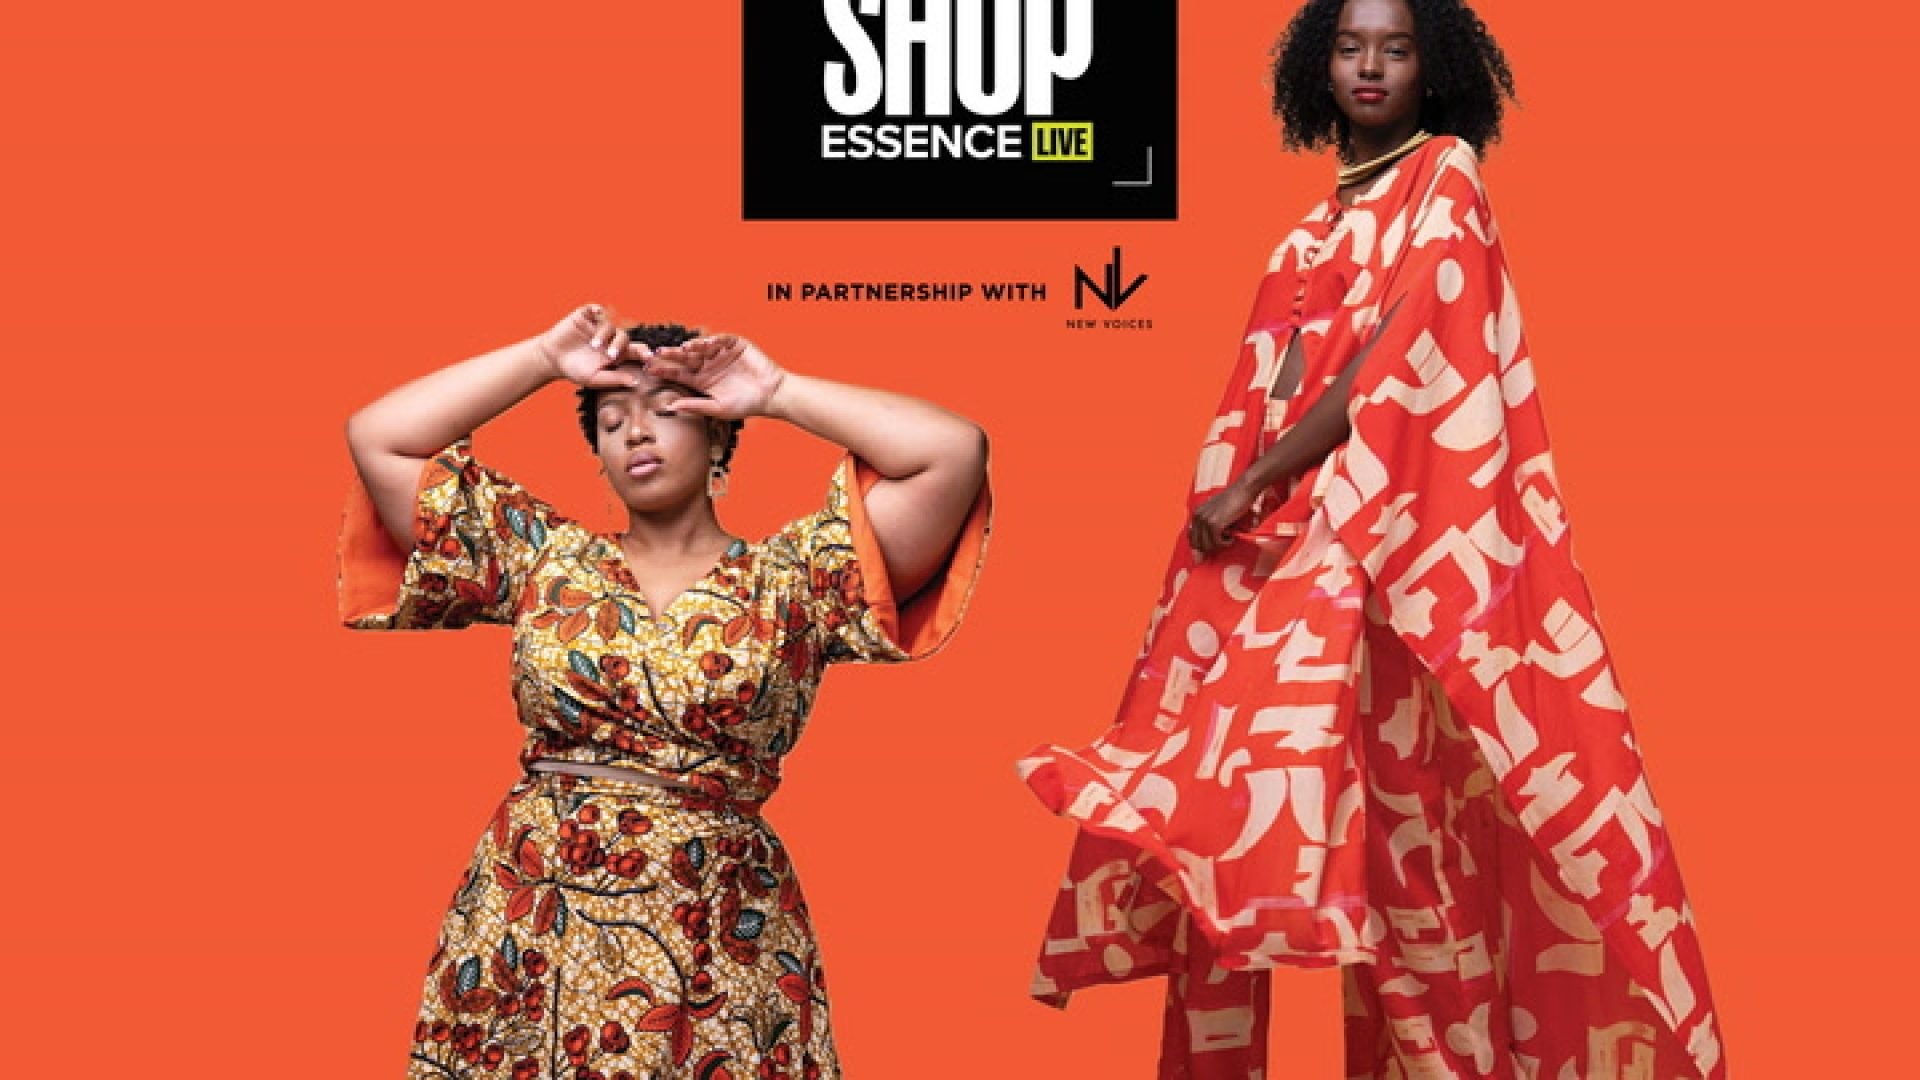 WATCH | This Nigerian Fashion line has so much versatility, each piece can be worn in at least 3 different ways!